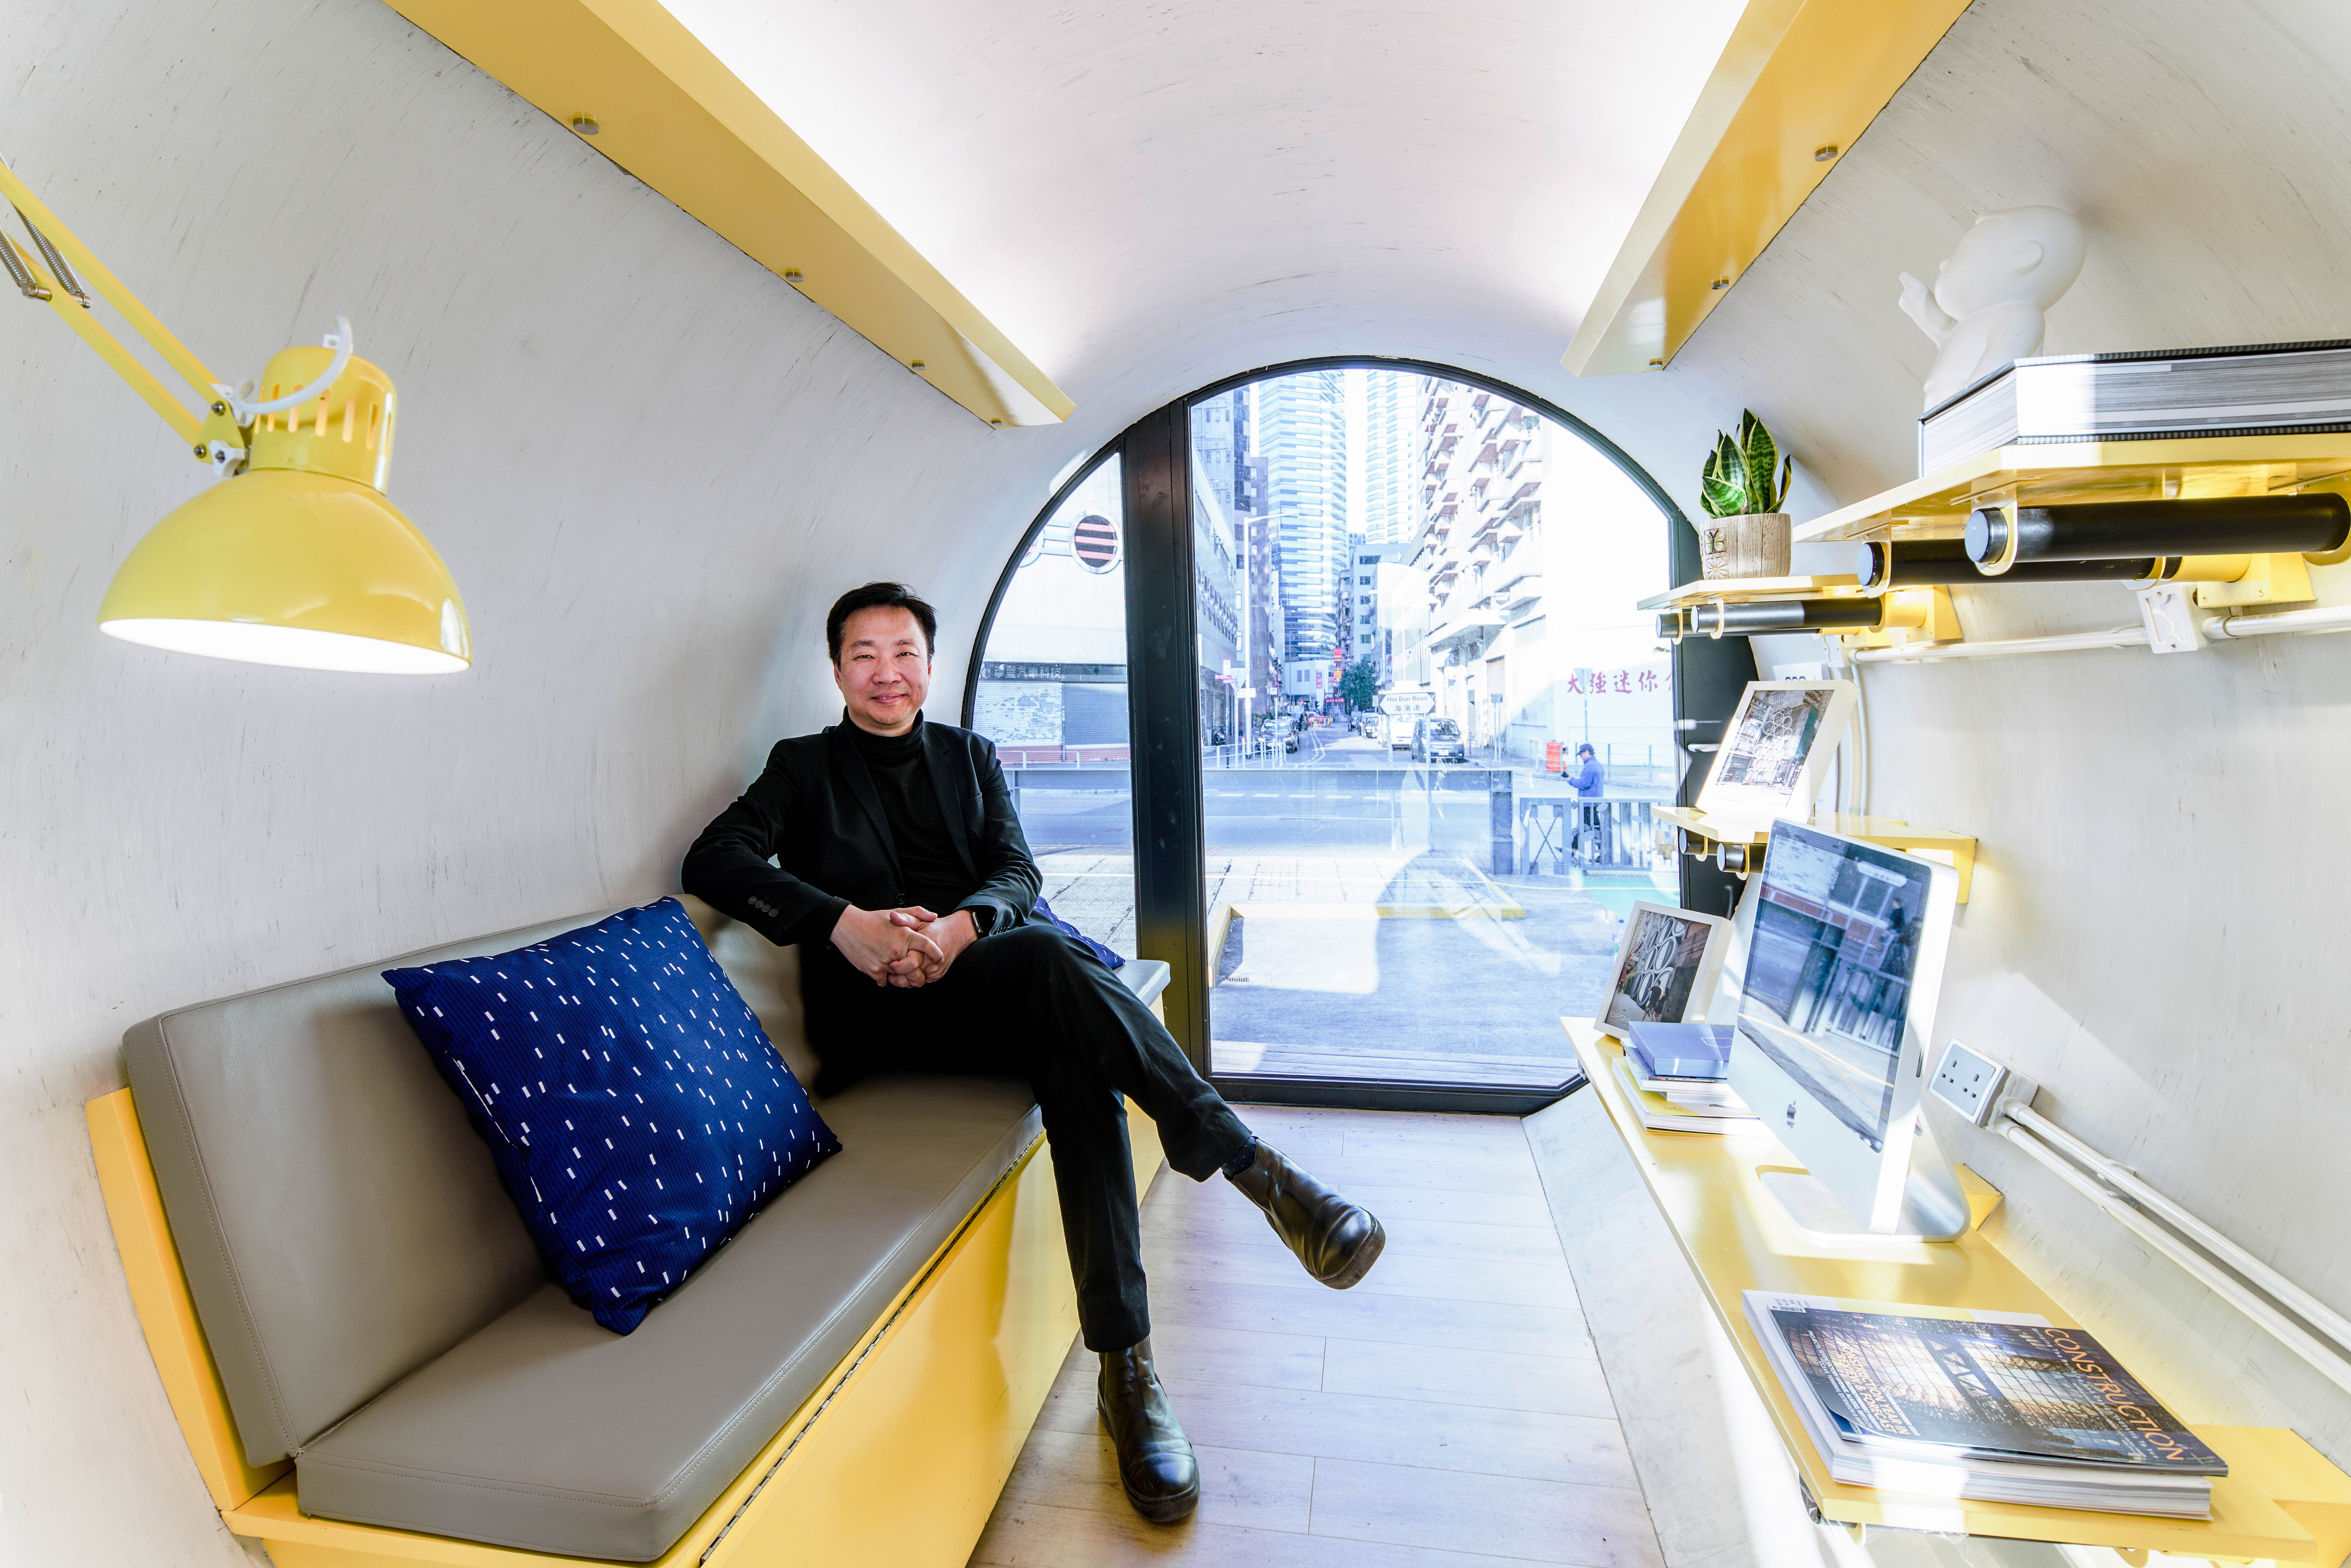 James Law, founder of James Law Cybertecture, sits in the OPod, which he designed as a possible solution for HK’s housing crisis